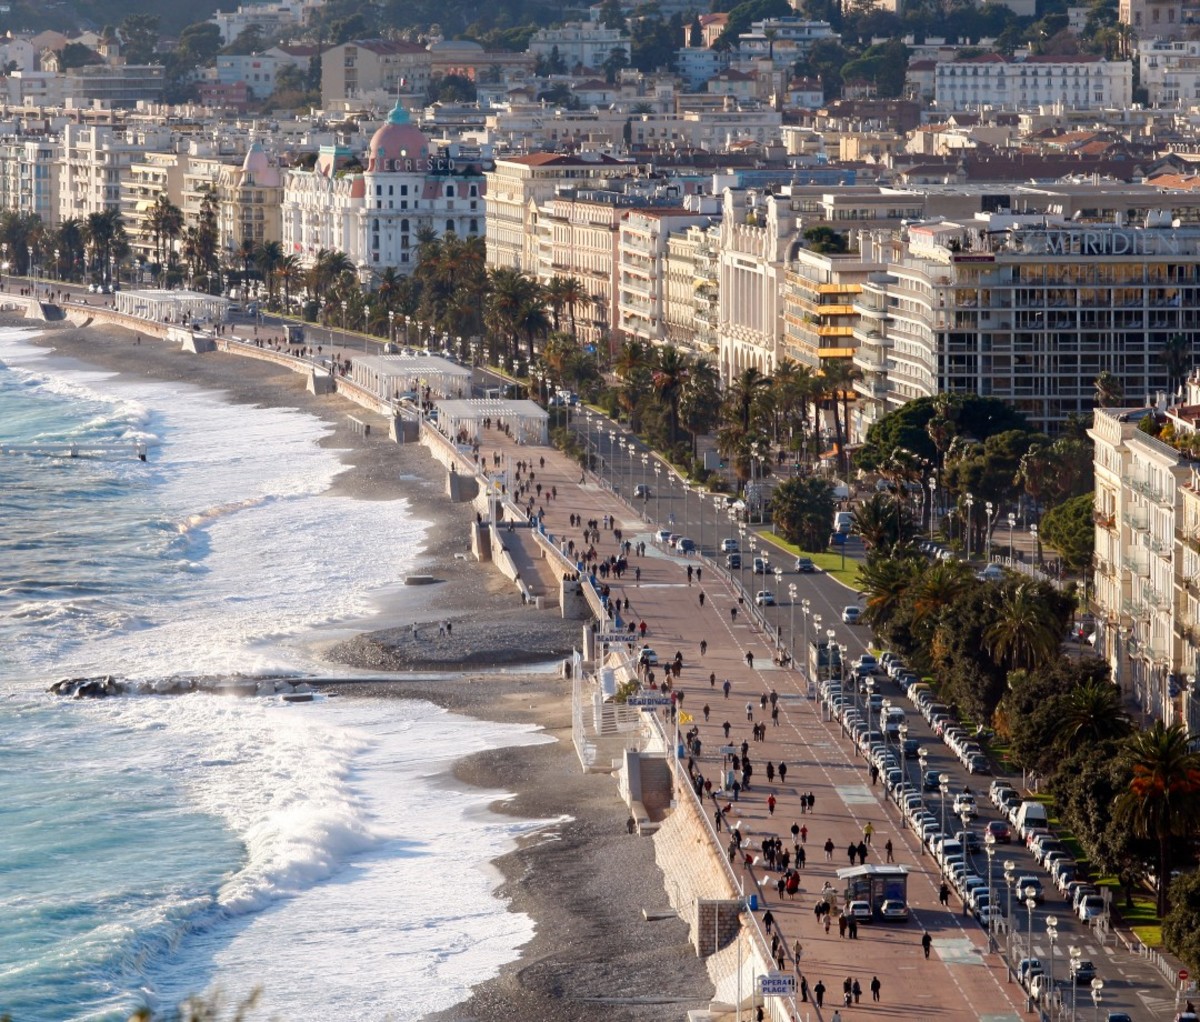 An aerial shot of Nice, France with the sea, beach, and city buildings.